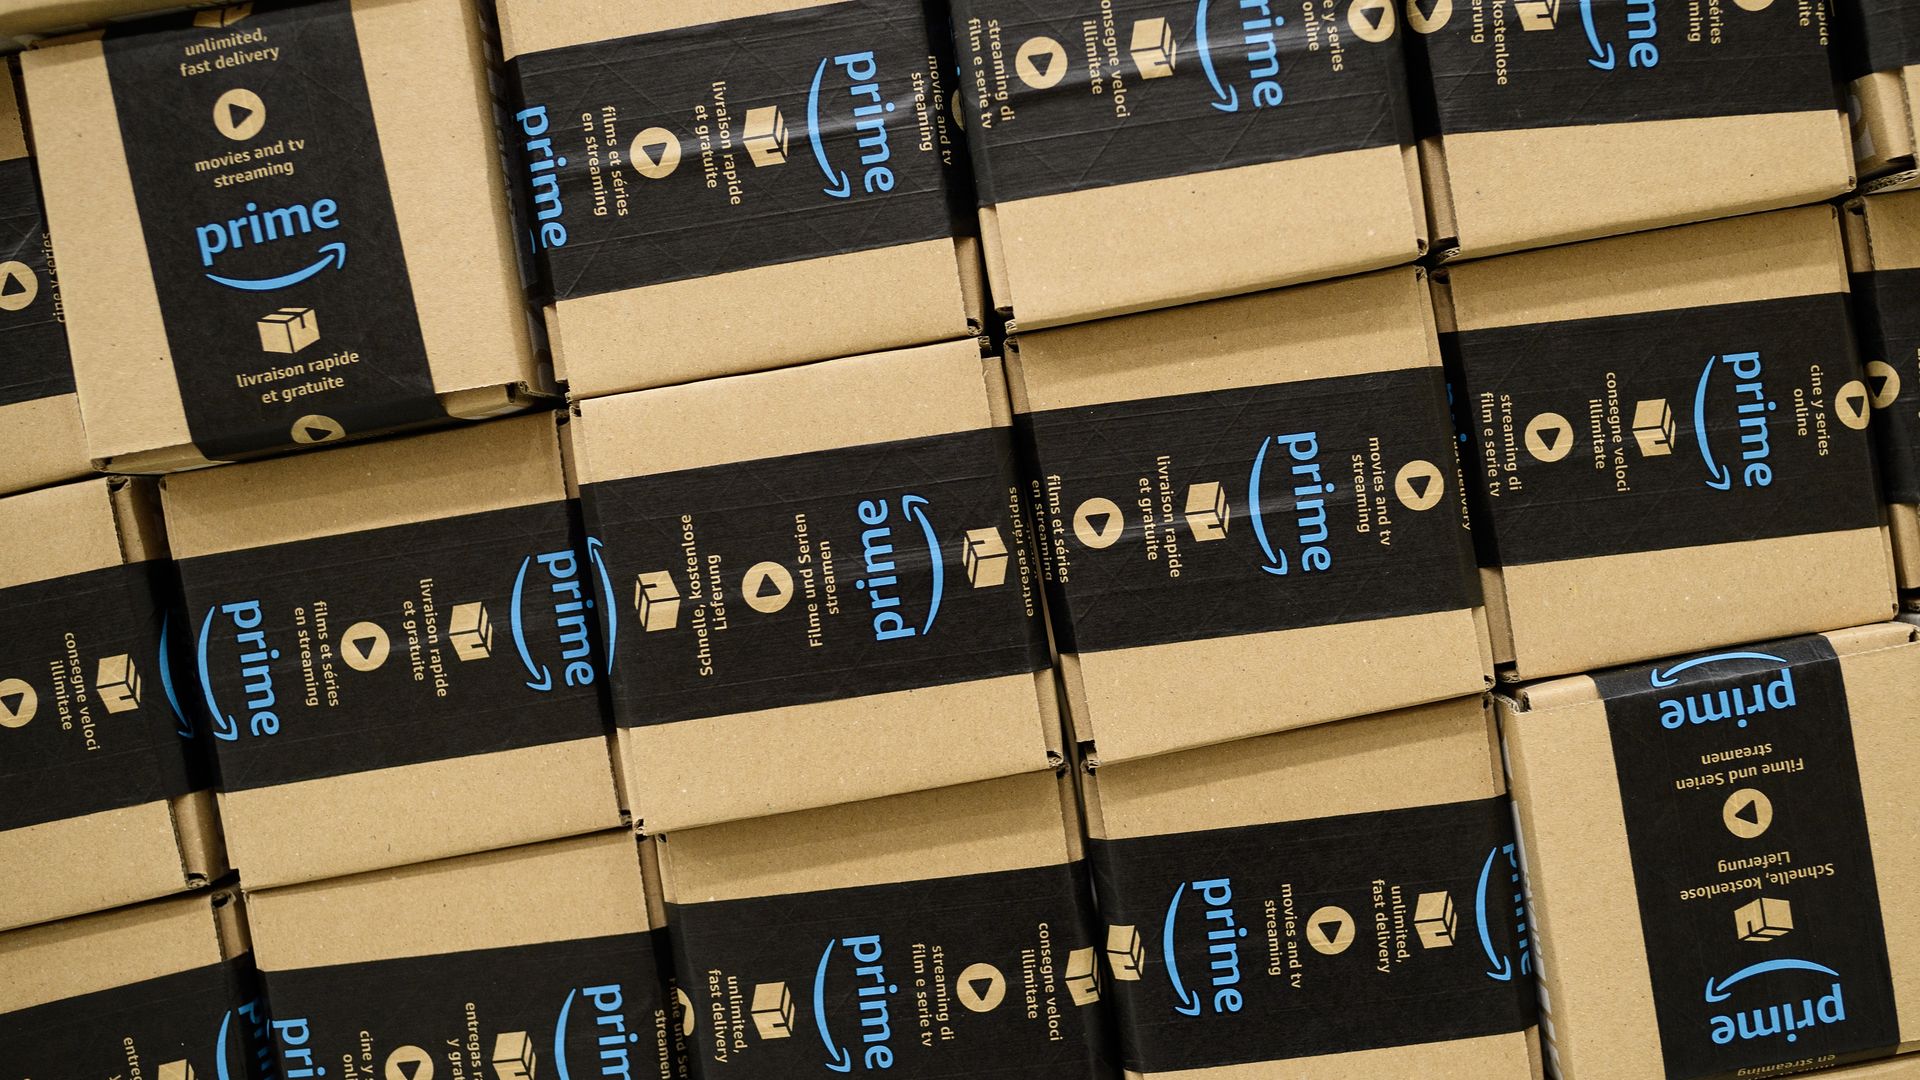 Amazon Prime shipping boxes piled up